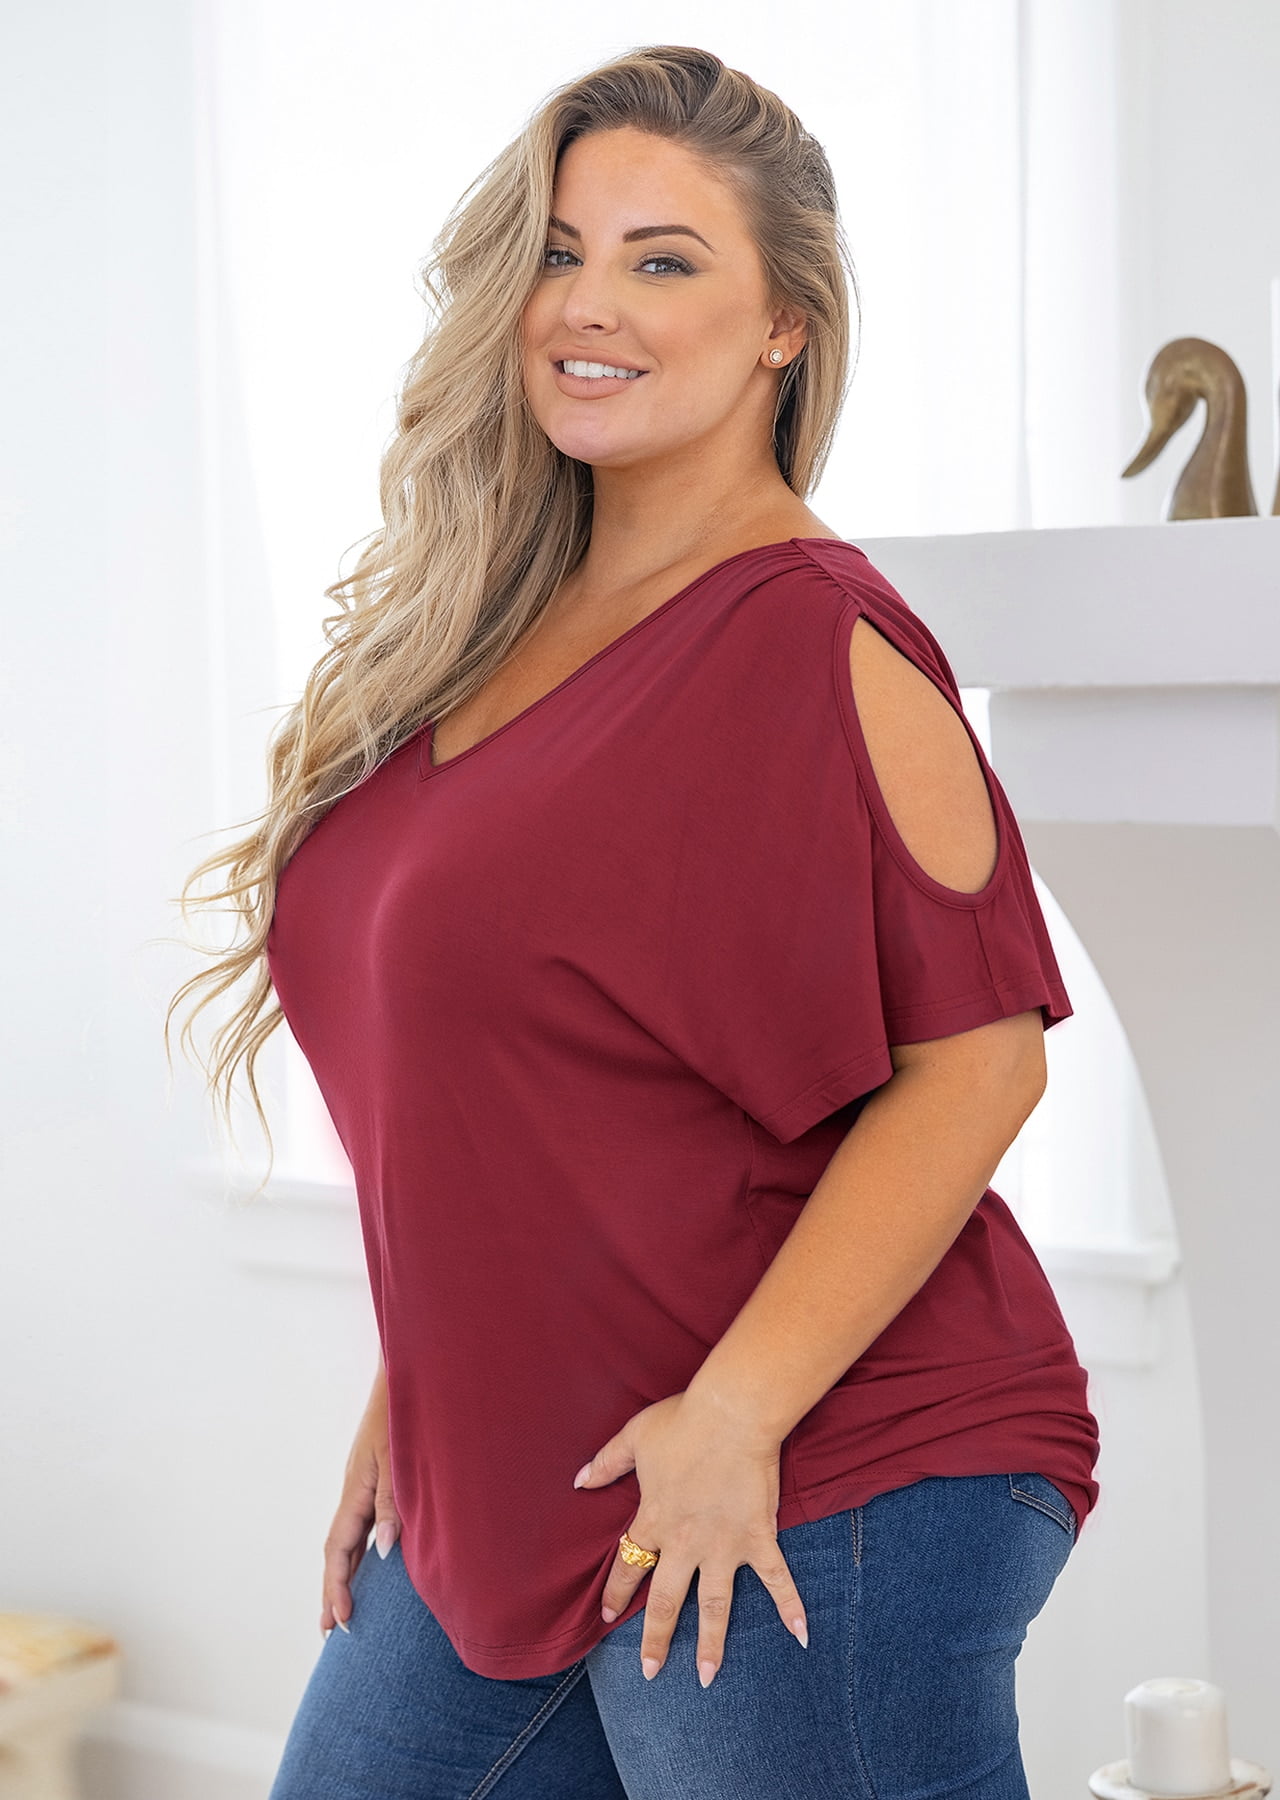 SHOWMALL Plus Size Shirt for Women Cold Shoulder Top Burgundy 2X Blouse  Short Sleeve Clothing V Neck Tunic Summer Clothes 